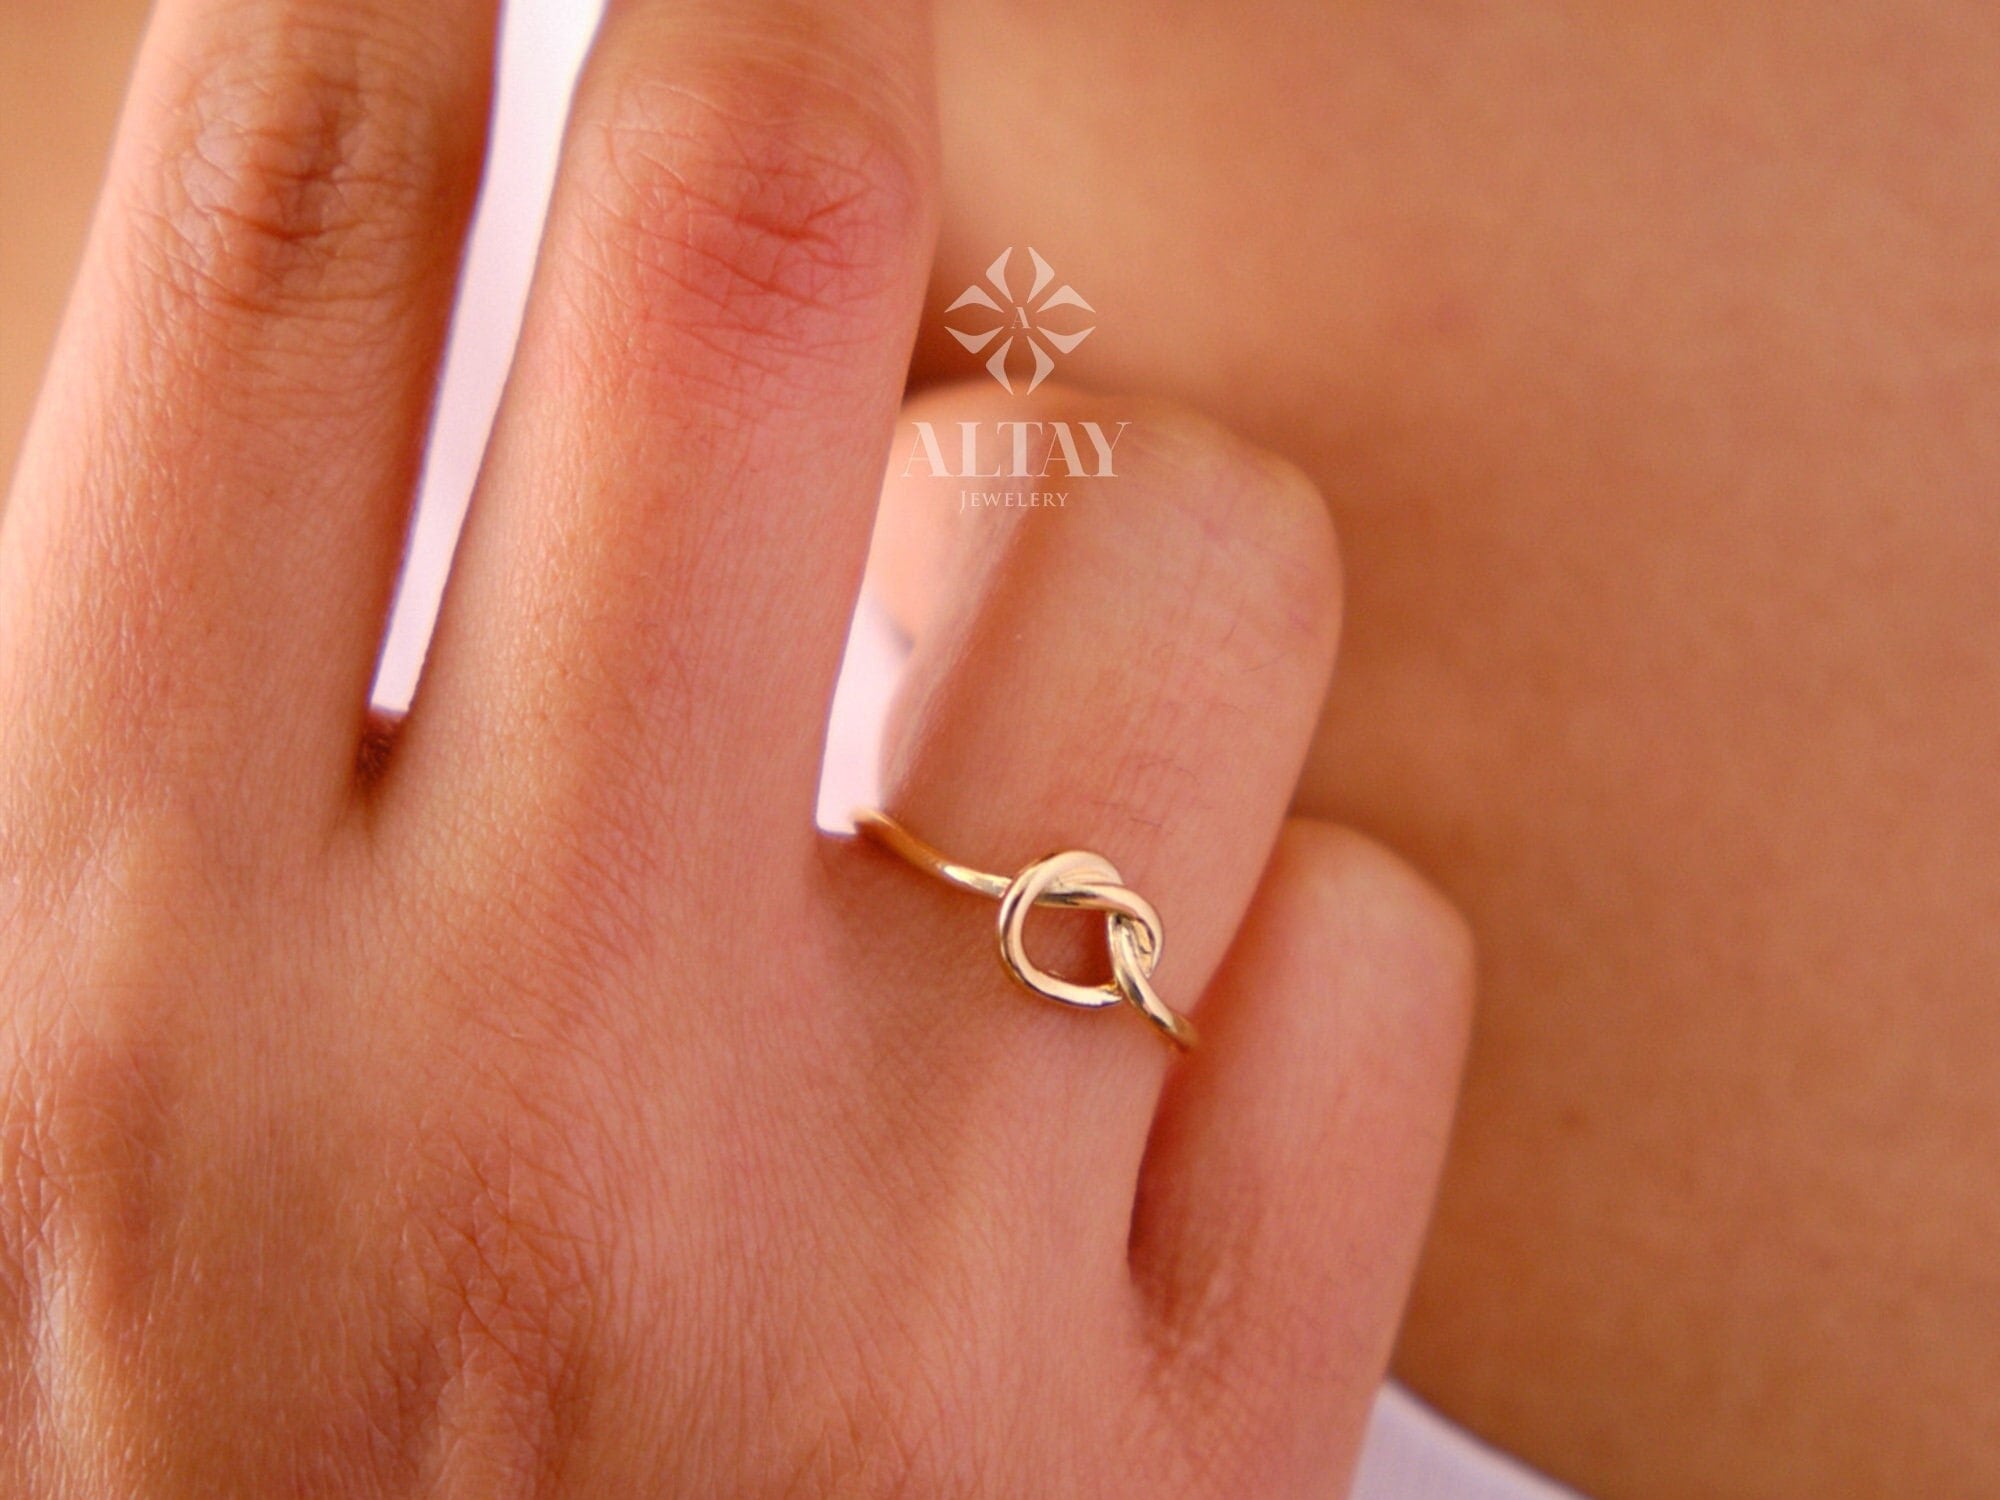 14K Solid Gold Knot Ring, Tie The Knot Ring, Dainty Knot Ring, Minimalist Fashion Stackable, Delicate, Pretzel Knot Ring, Twisted Wire Tie